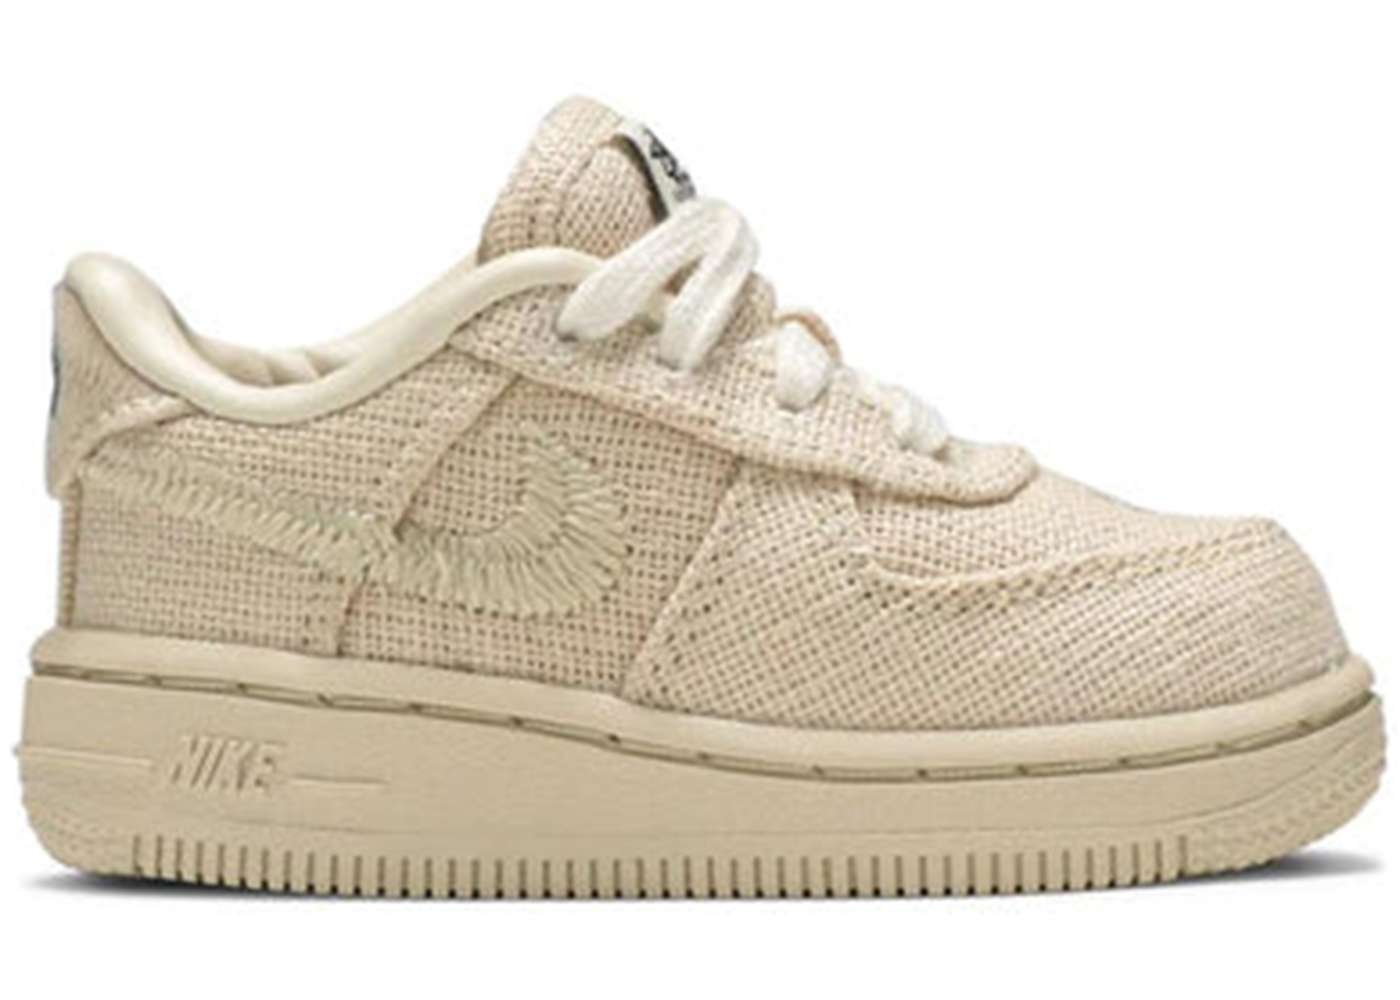 Nike Air Force 1 Low Stussy Fossil (TD) トドラー - DC8306-200 - JP